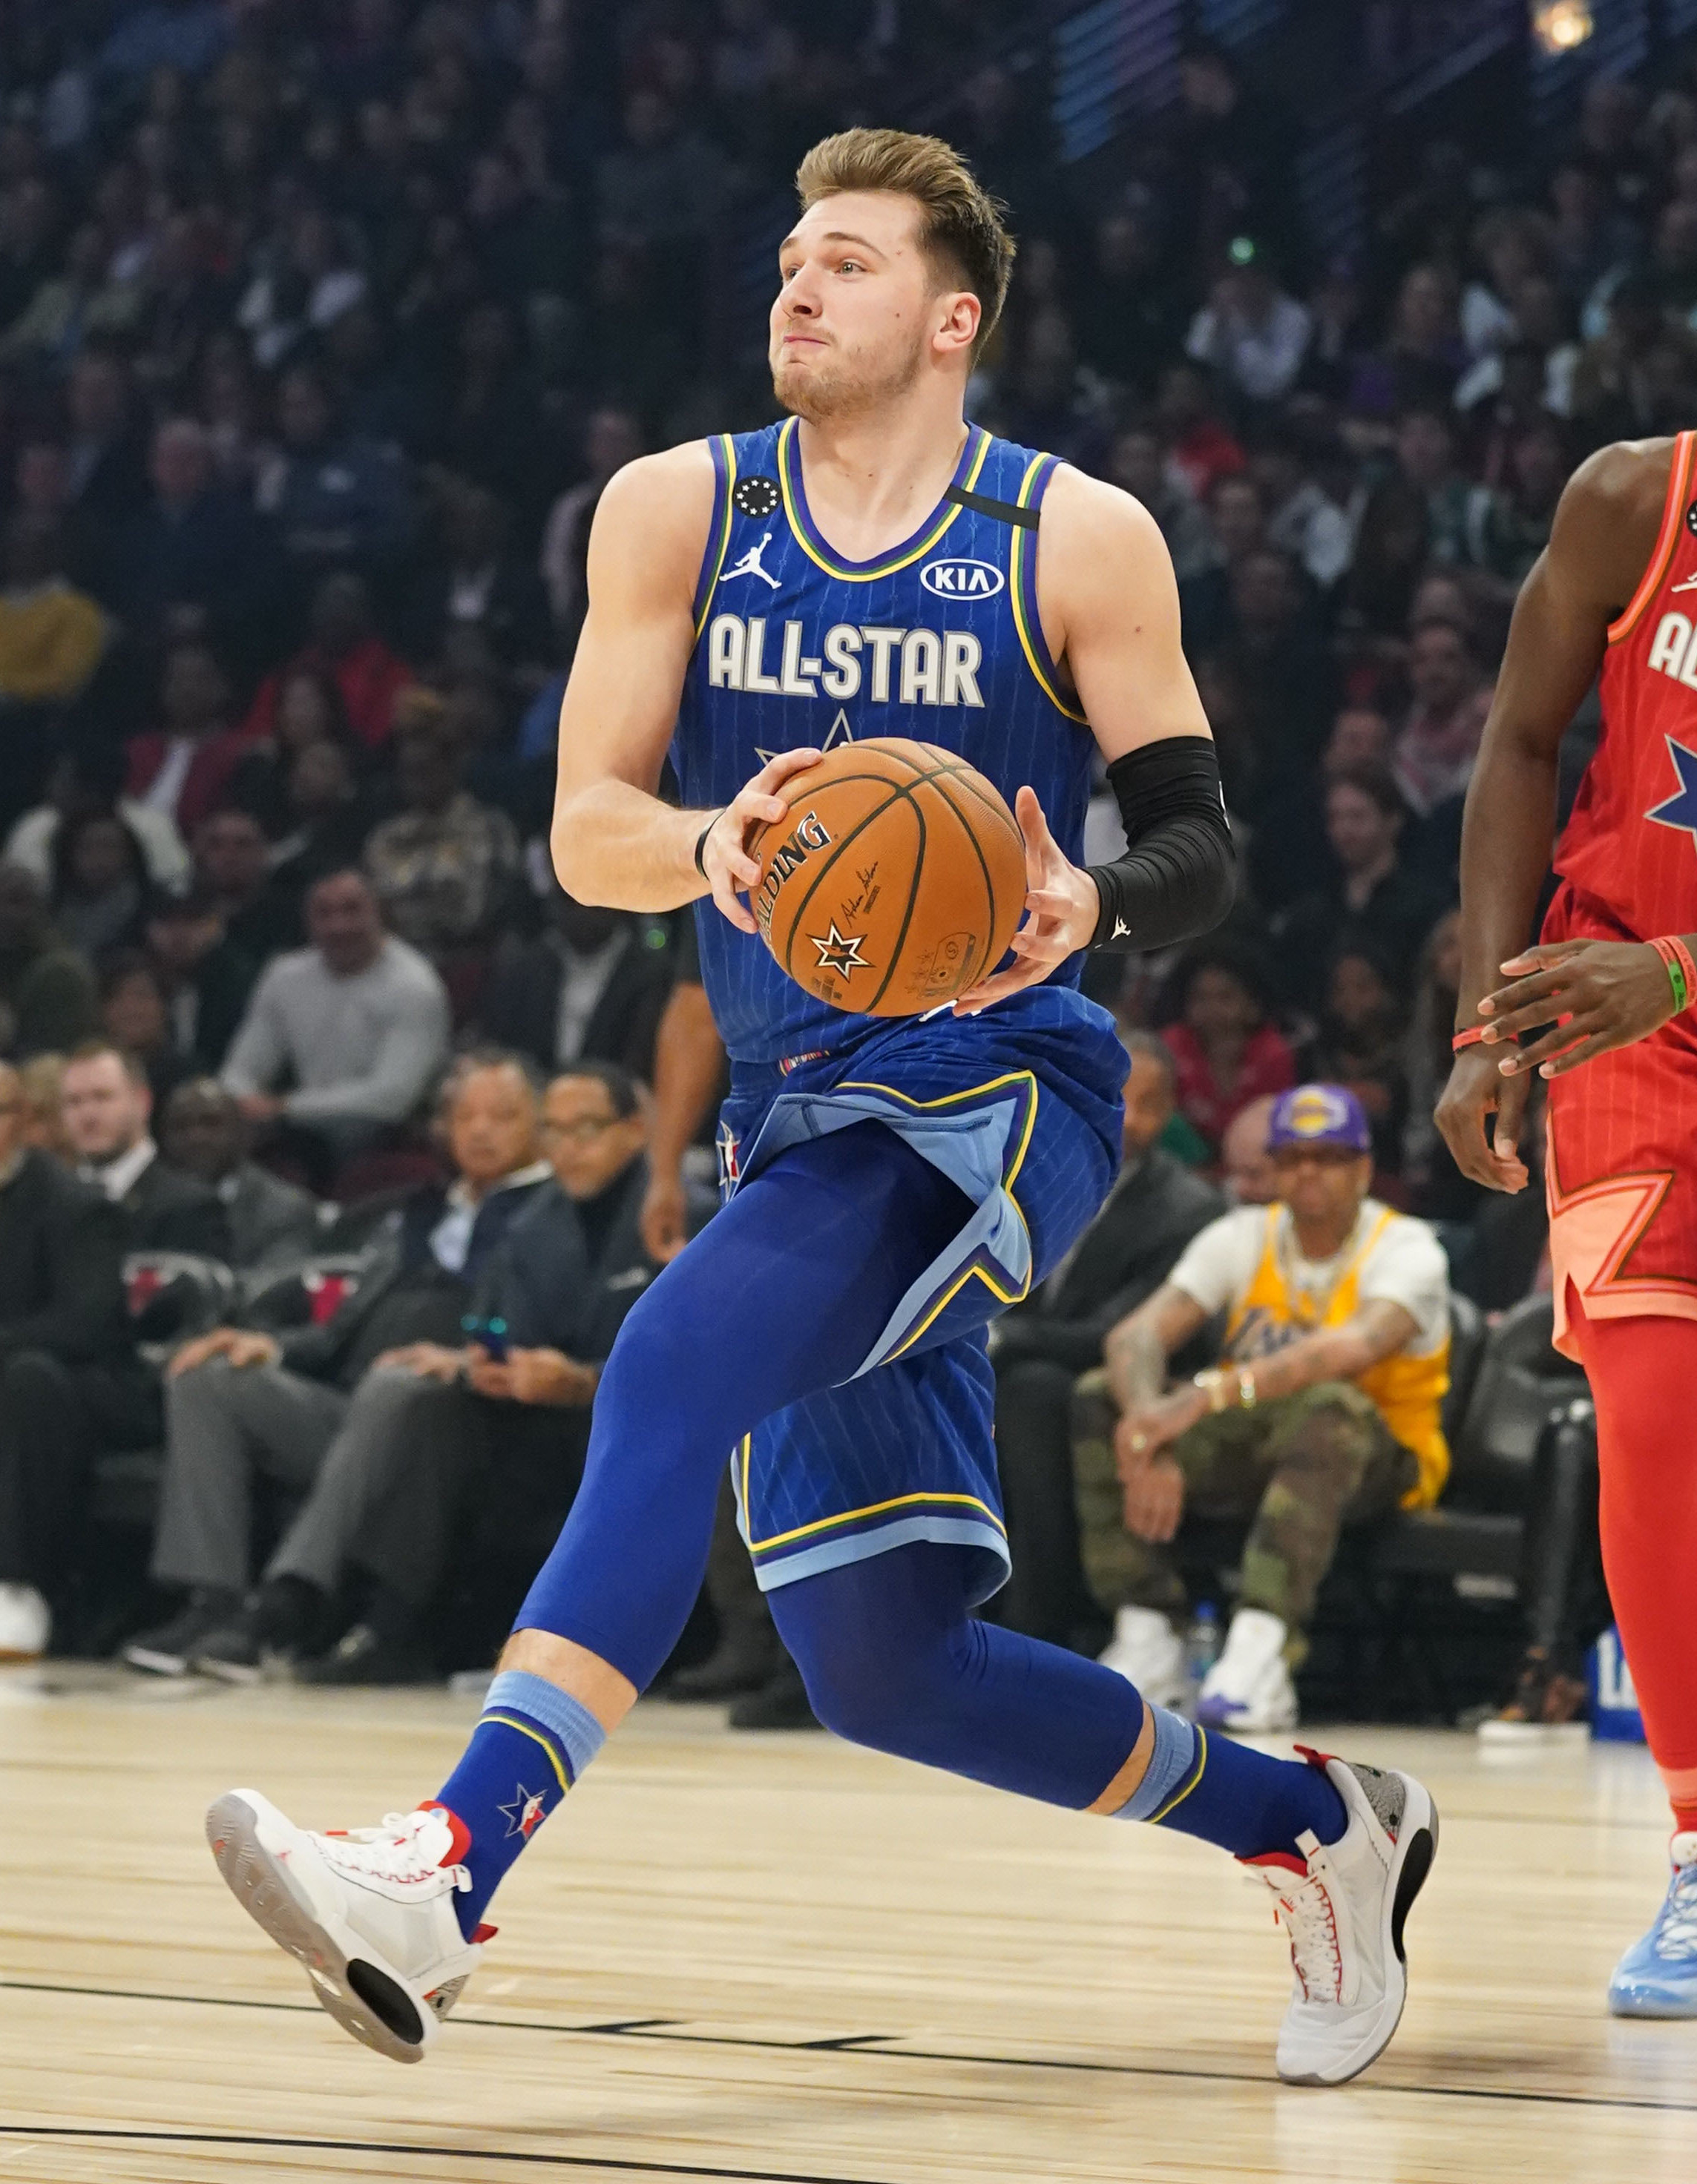 Every Sneaker Worn in the 2020 NBA All-Star Game